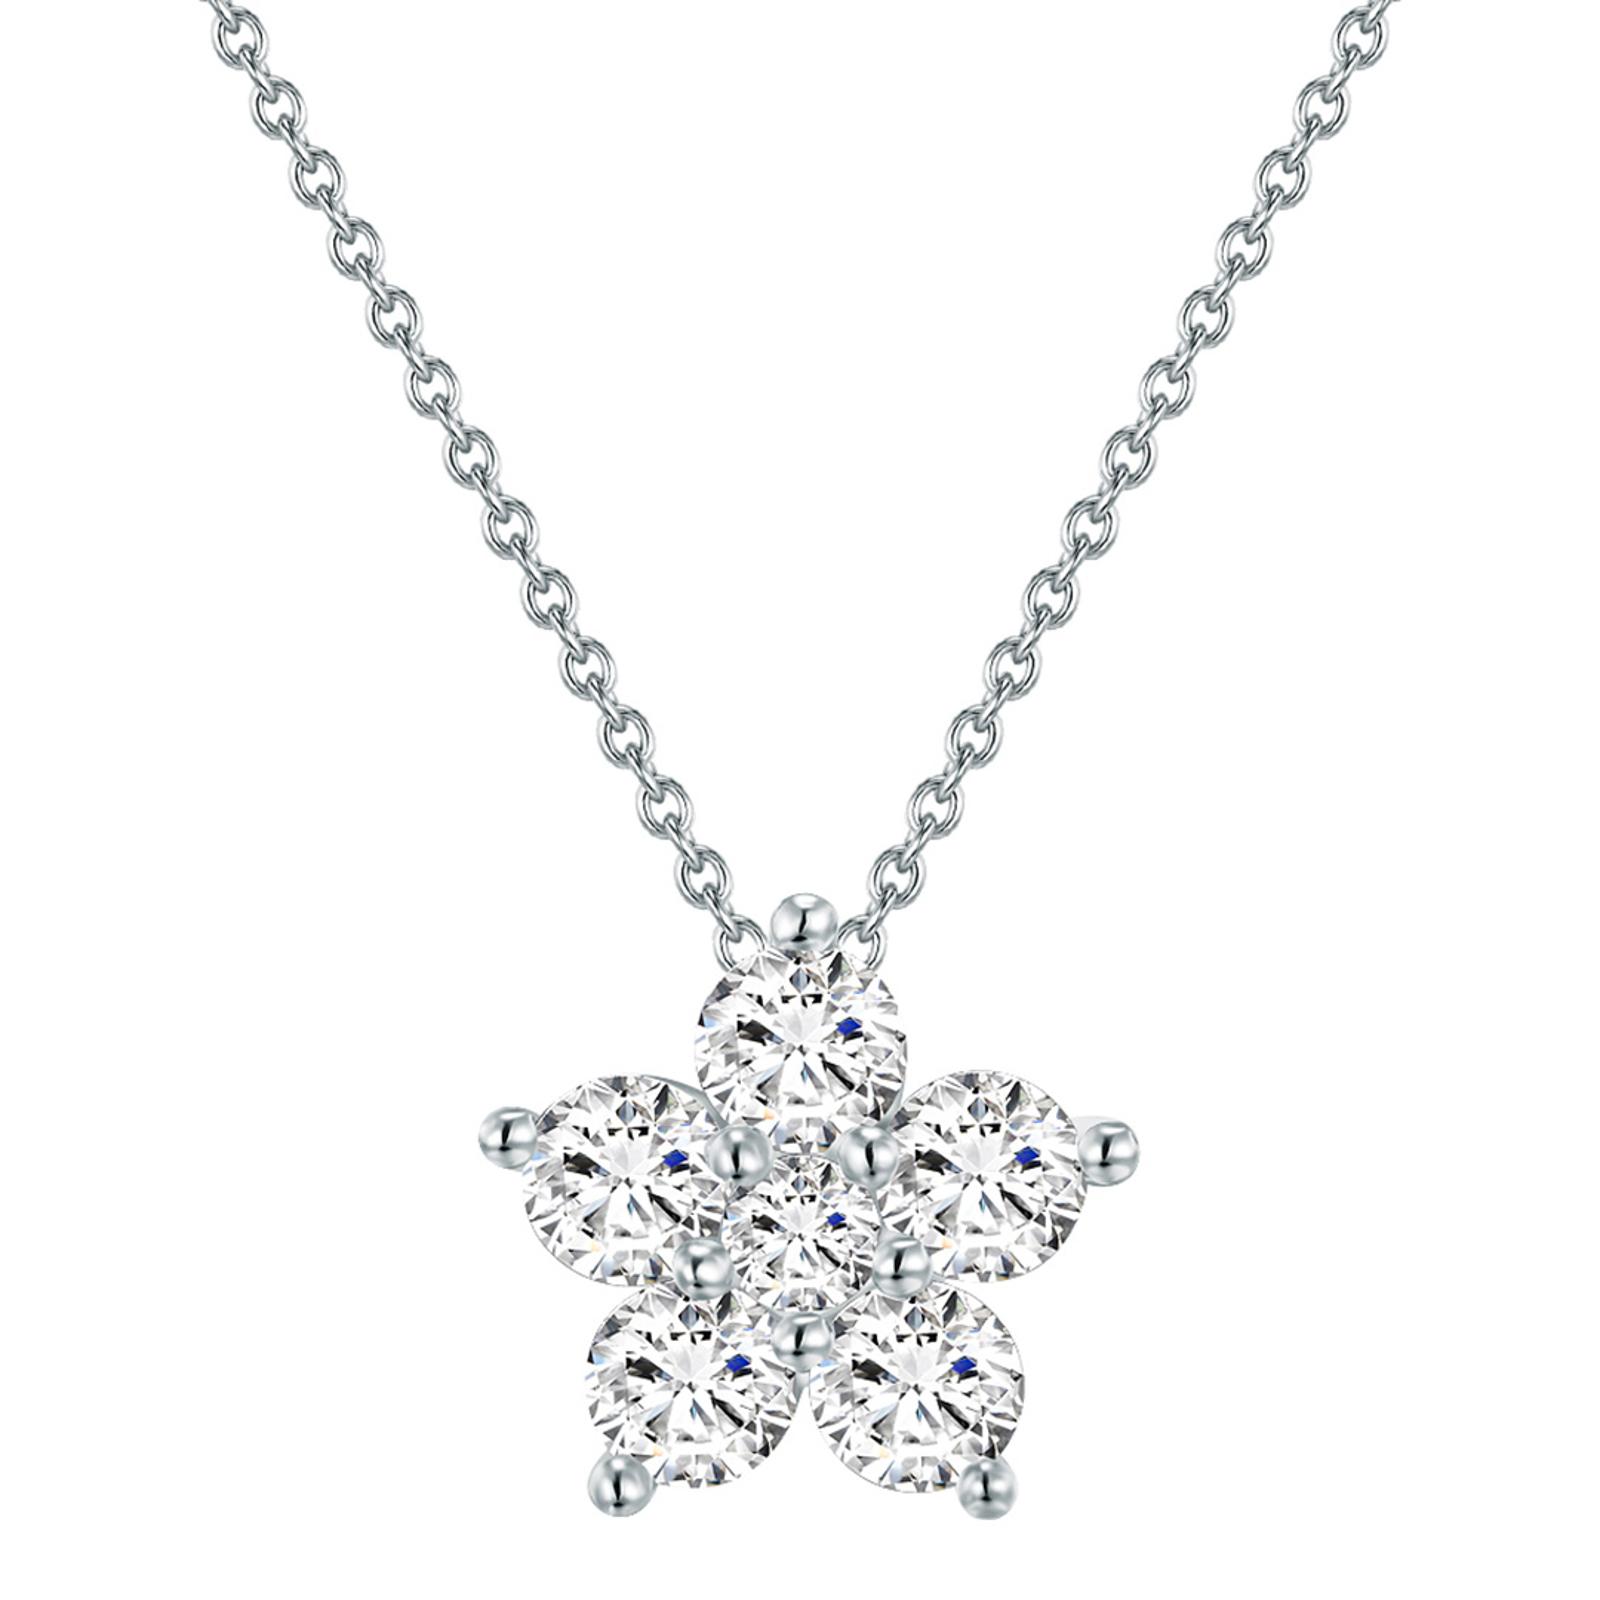 Sterling Silver Zirconia White Pendant Necklace - BrandAlley